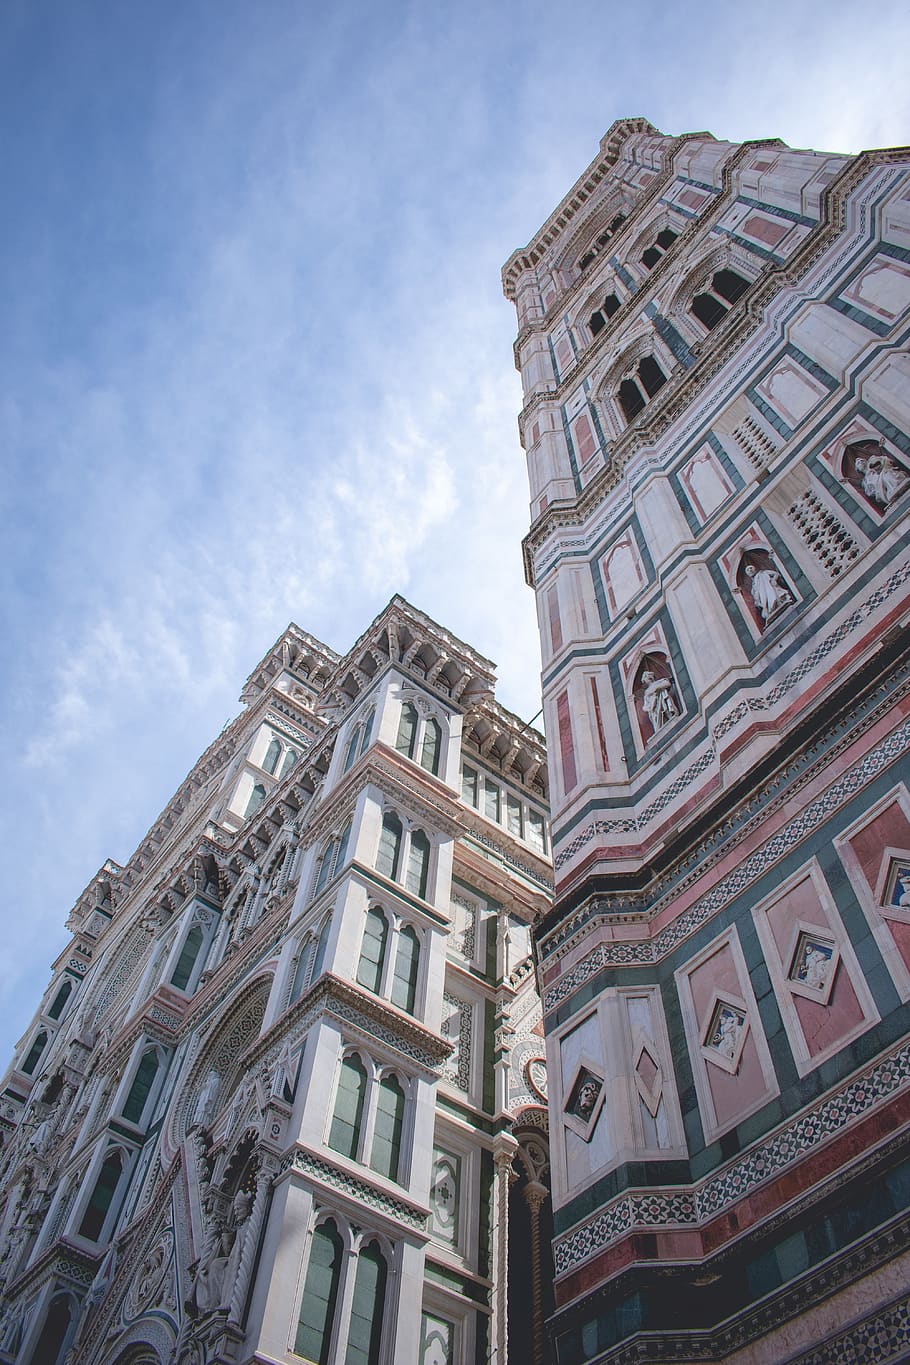 italy, florence, duomo, church, architecture, renaissance, tower